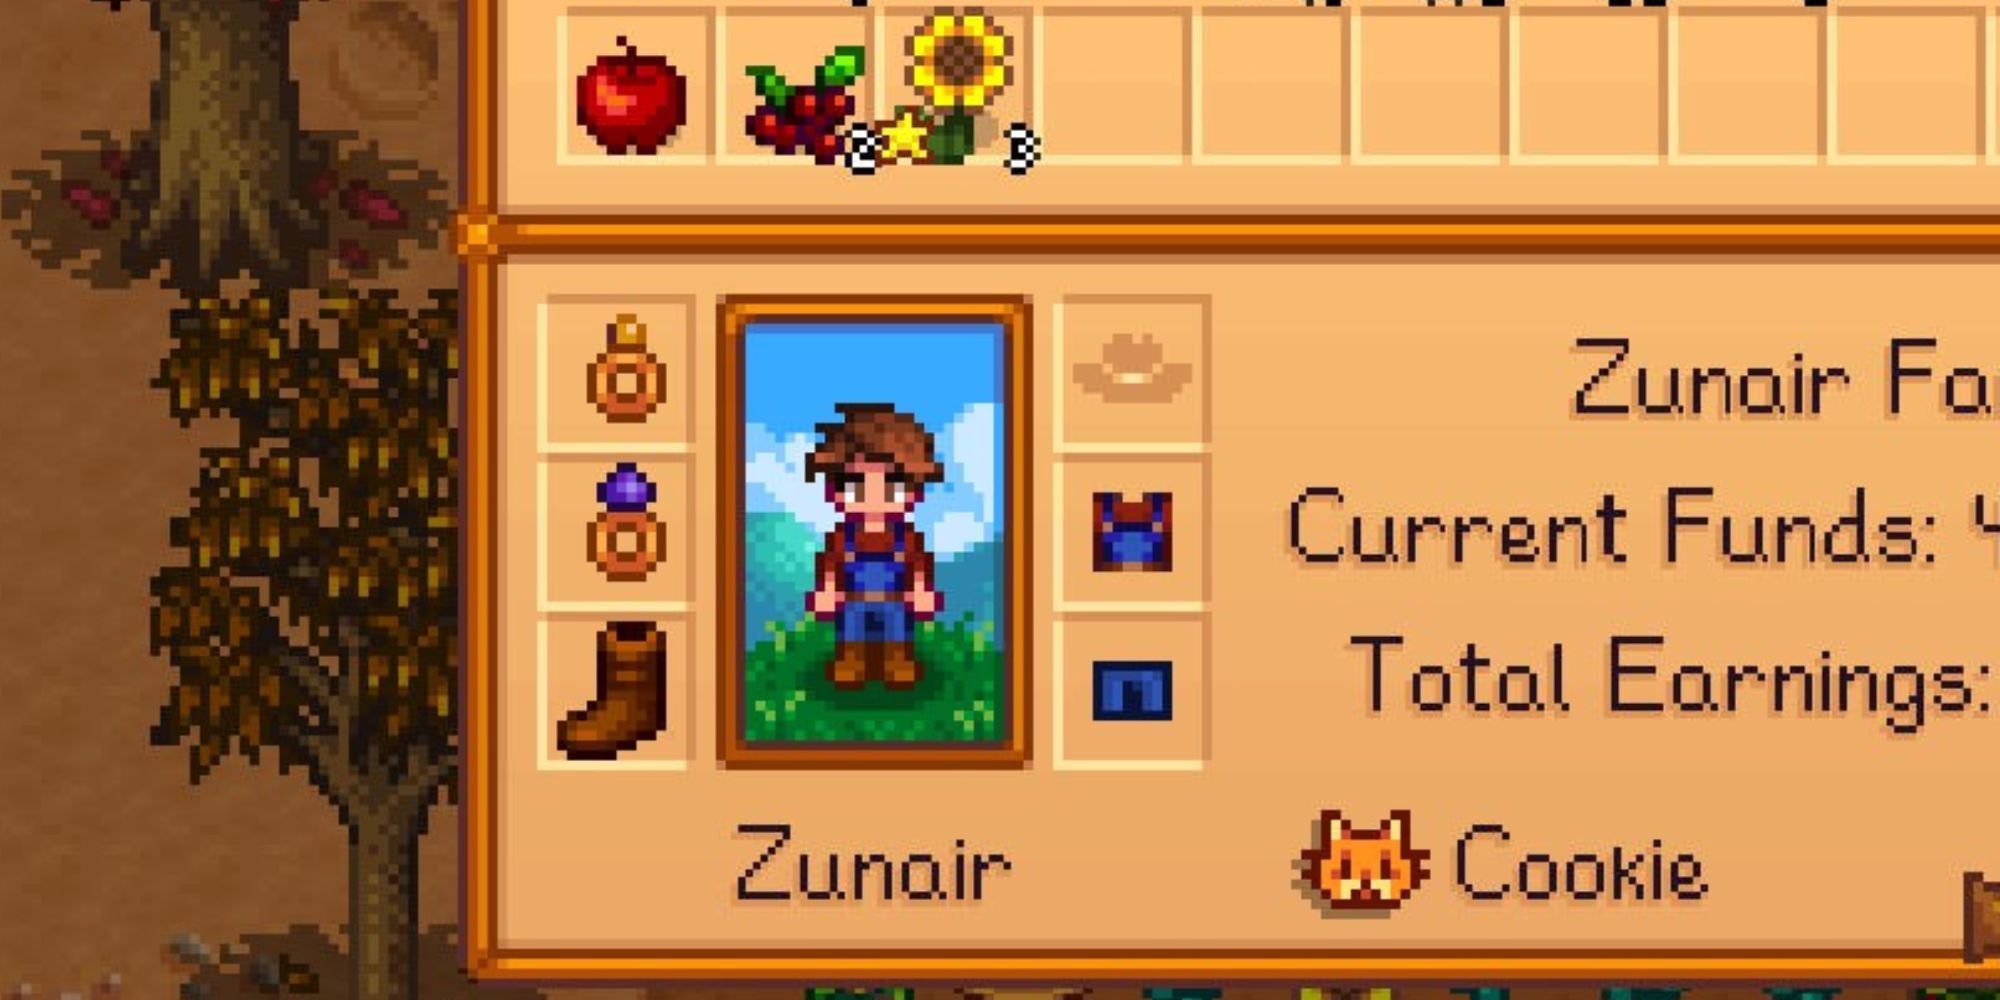 stardew valley character image